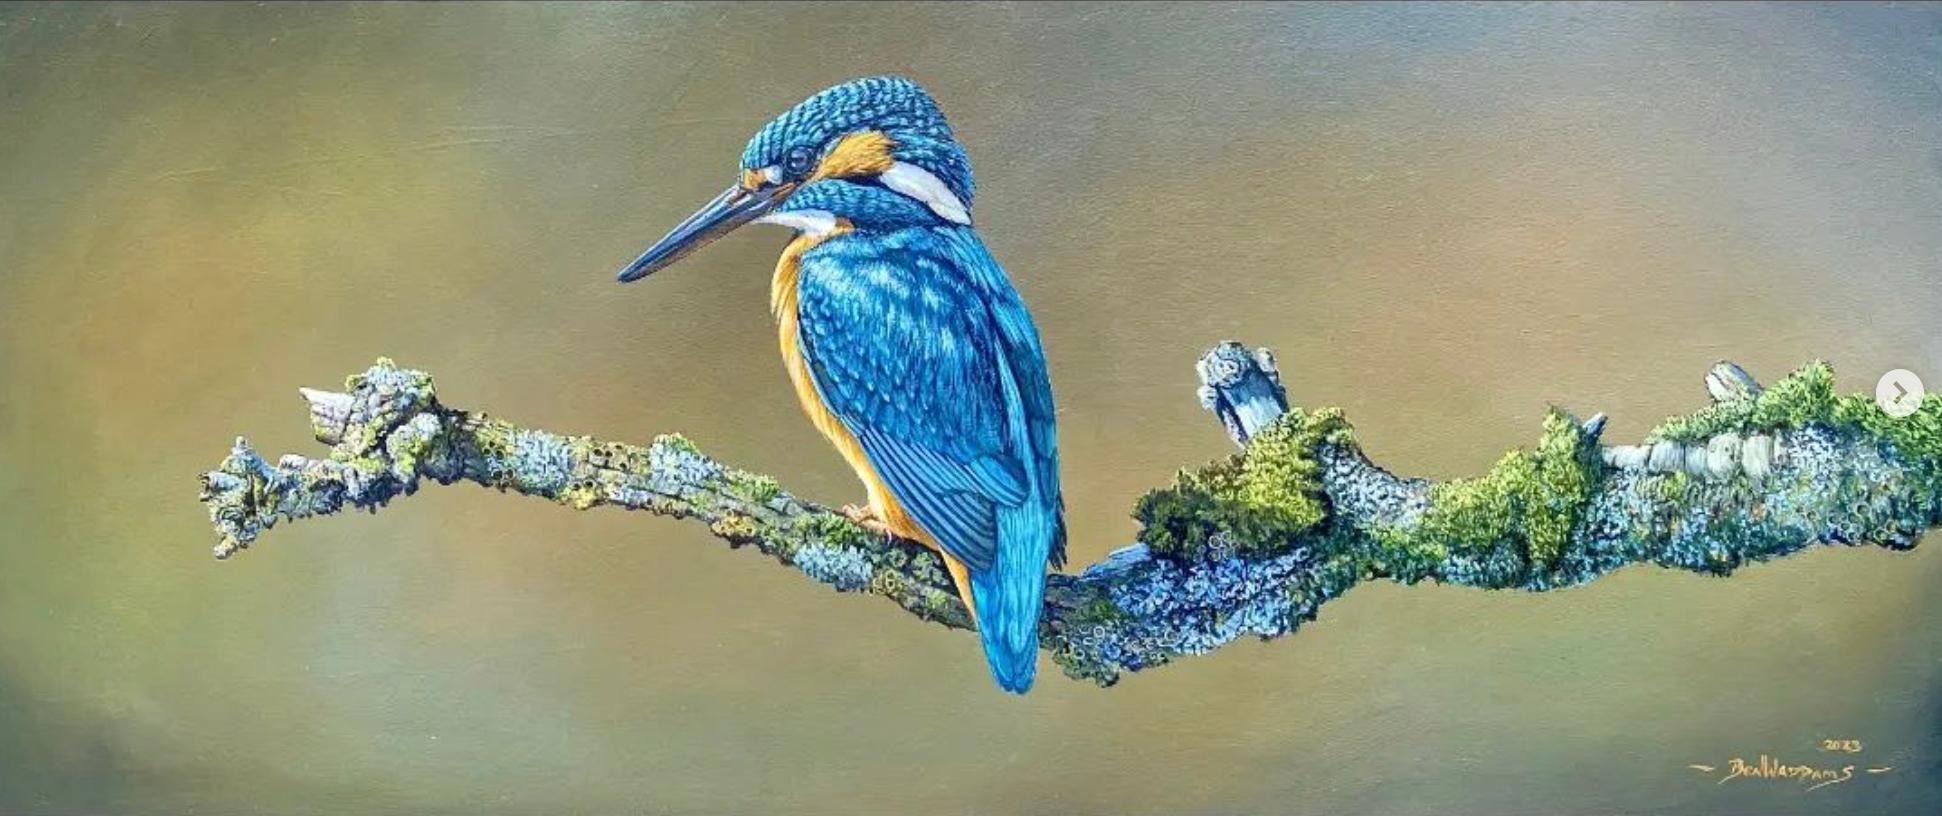 'A Moment rest' Photorealist painting of a Kingfisher in the wild, blue, orange